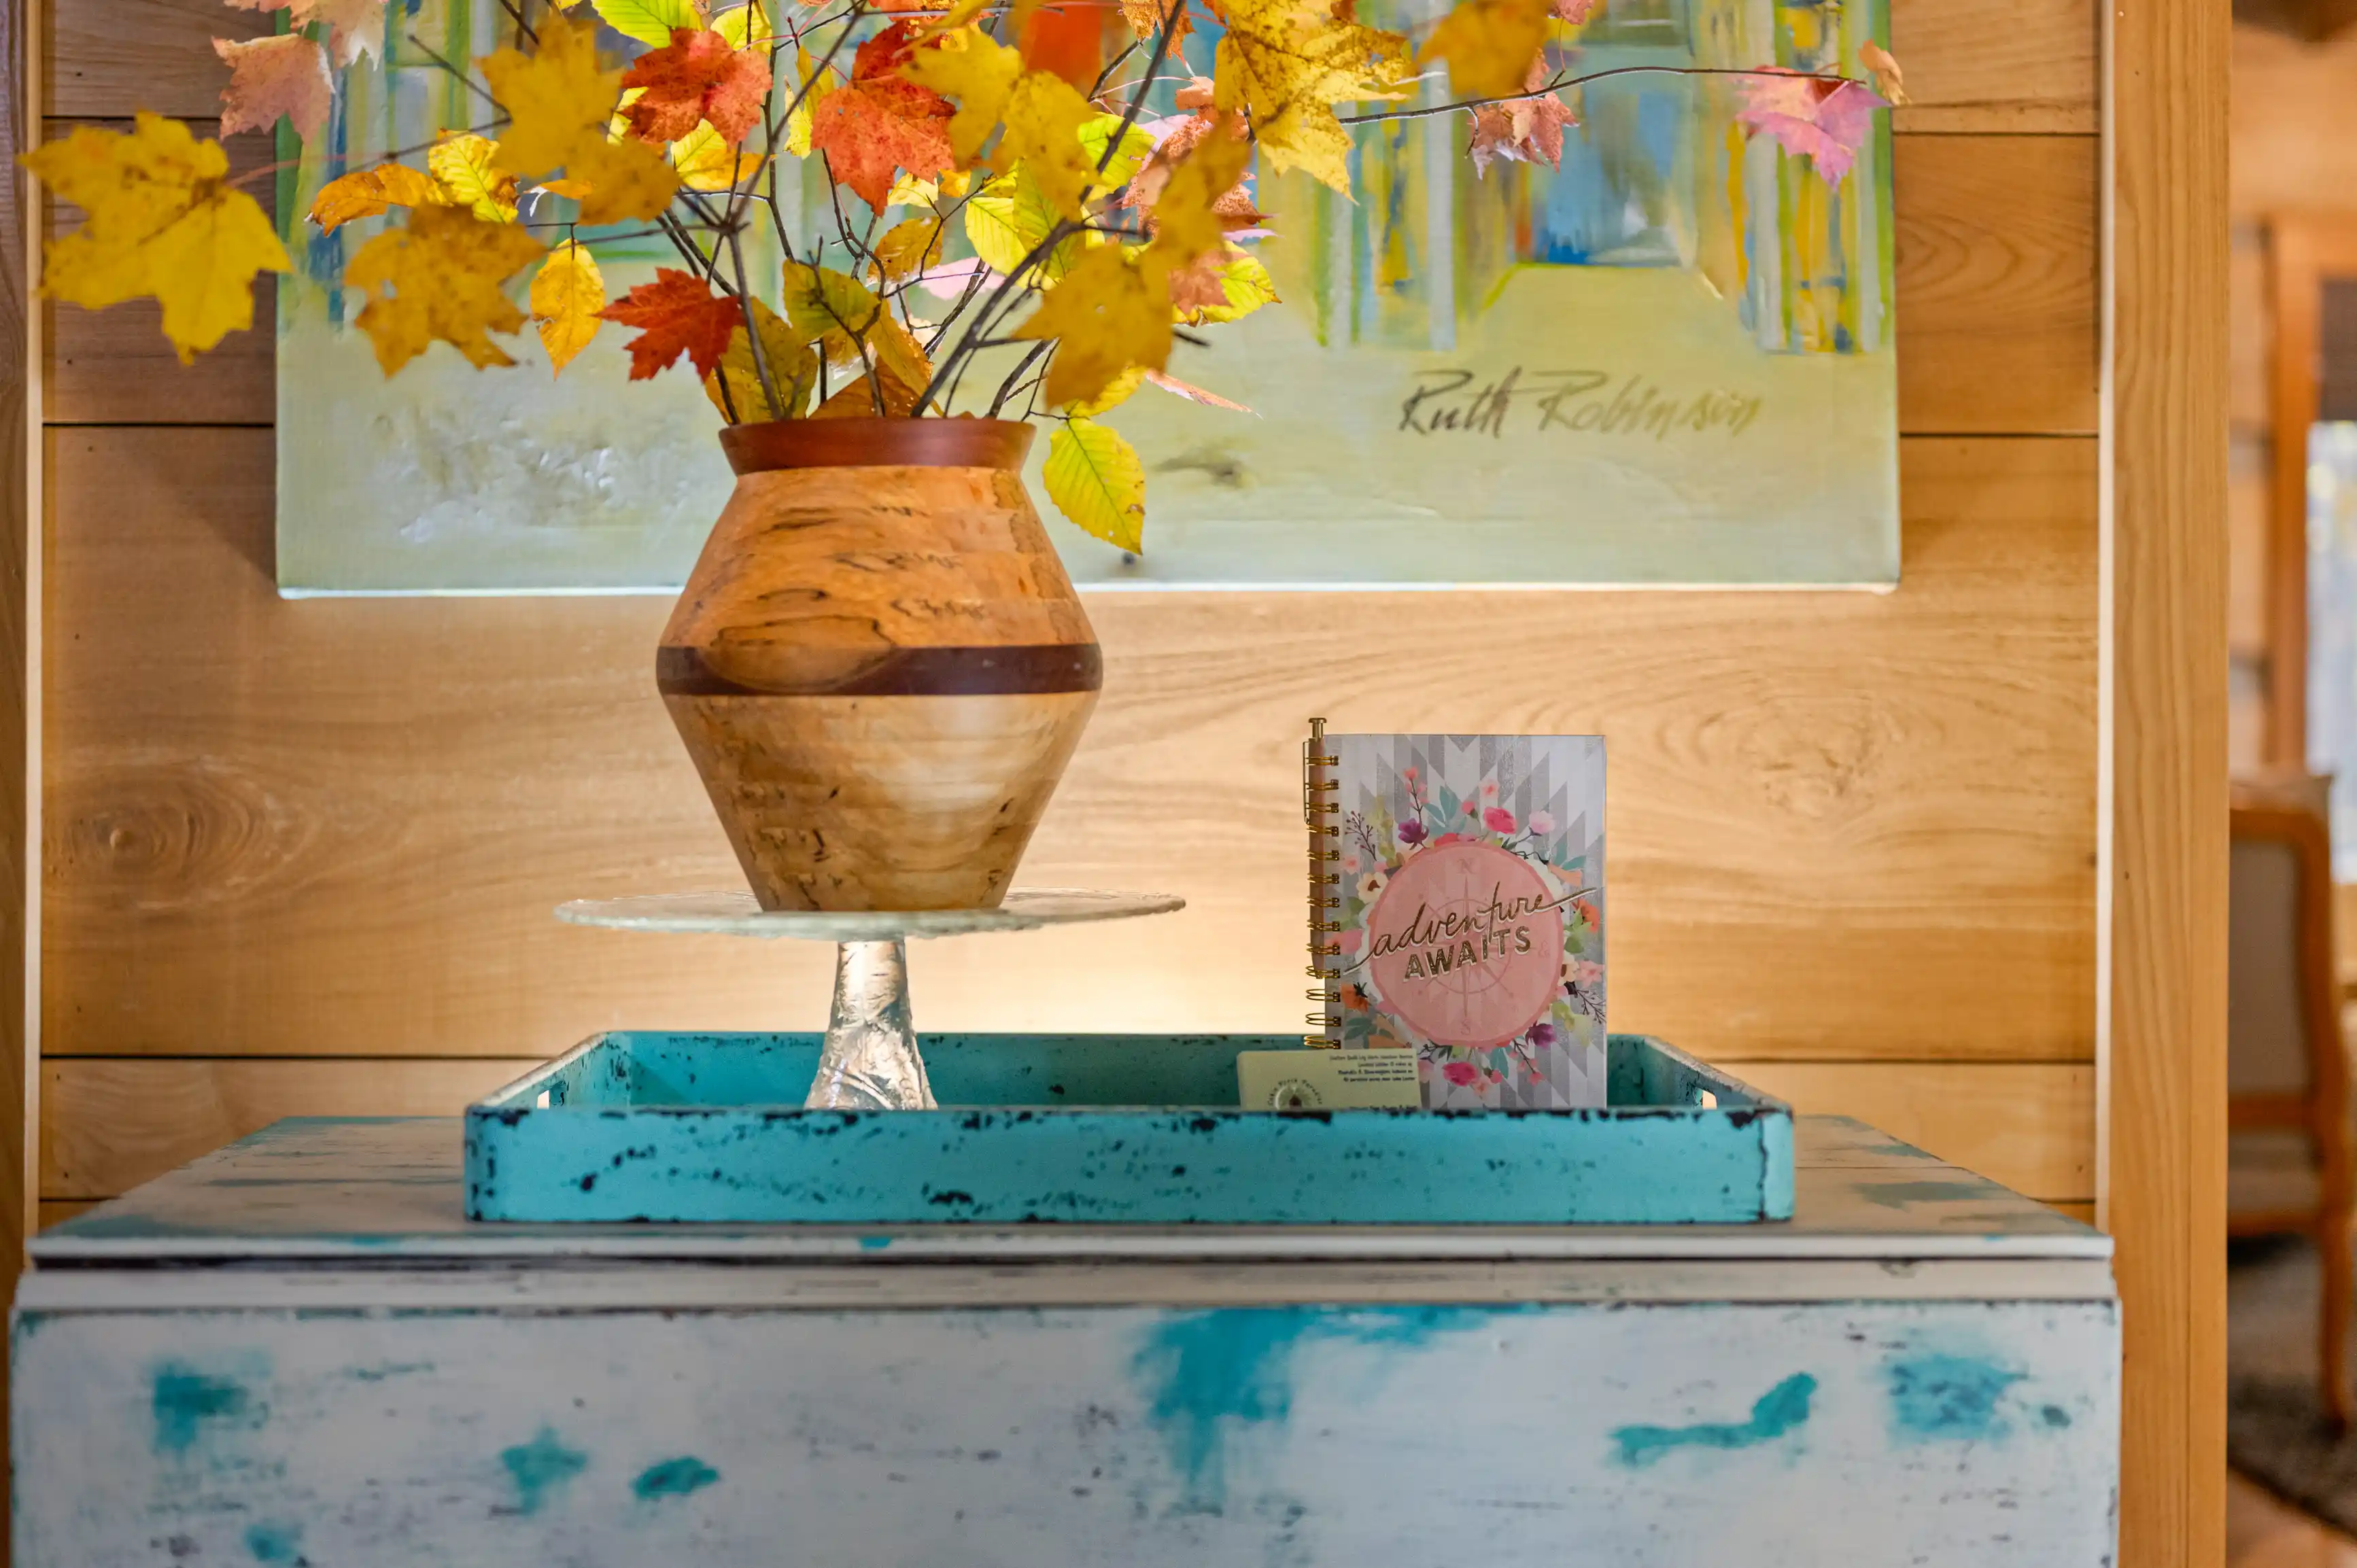 Vase with autumn leaves on a rustic blue painted wooden stand with a notebook titled 'Adventure Awaits,' beside it, in a warmly lit room with a painting in the background.